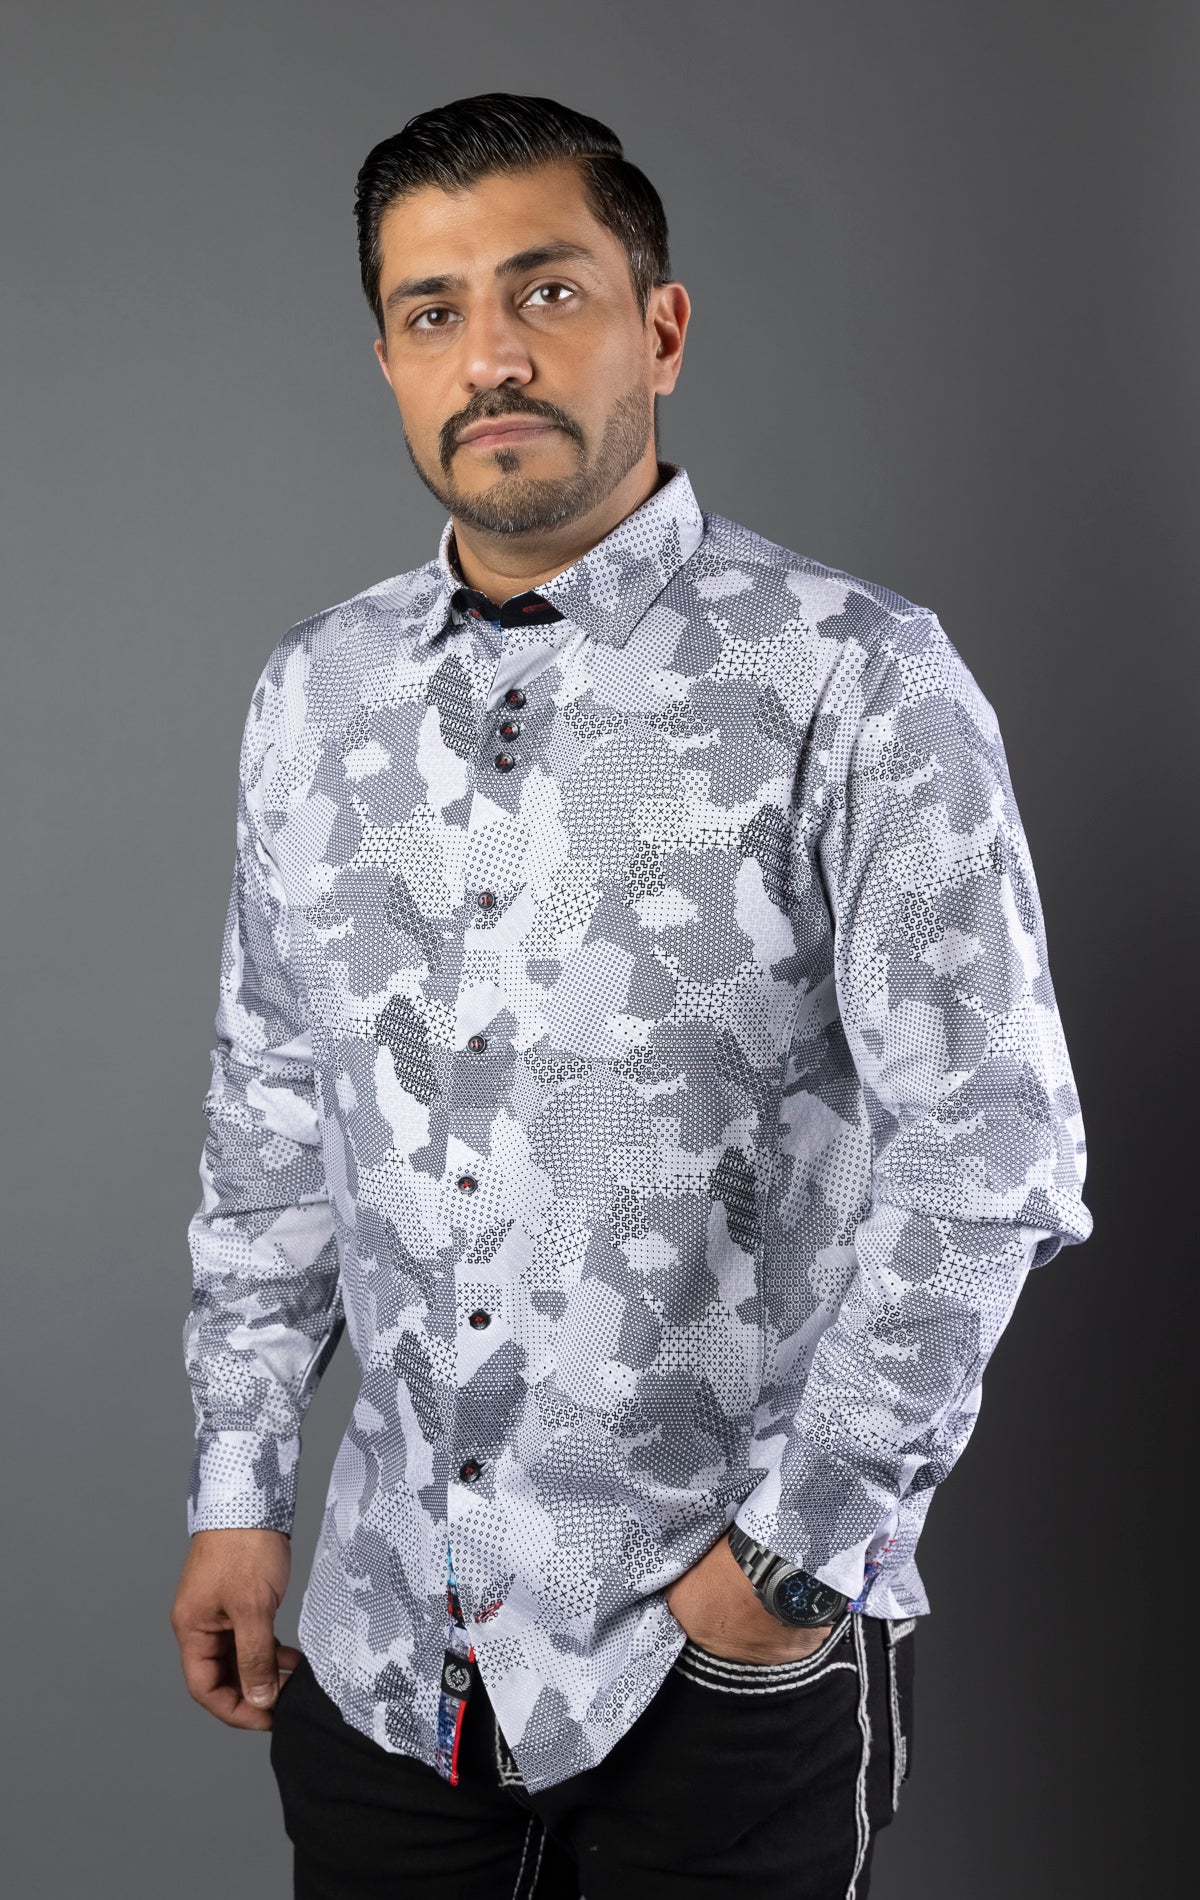 Long sleeve shirt with a stretch material in a variety of colors. The shirt has three buttons grouped together at the top placket, multiple embroidery details, and elegant ceramic buttons on the sleeve placket.